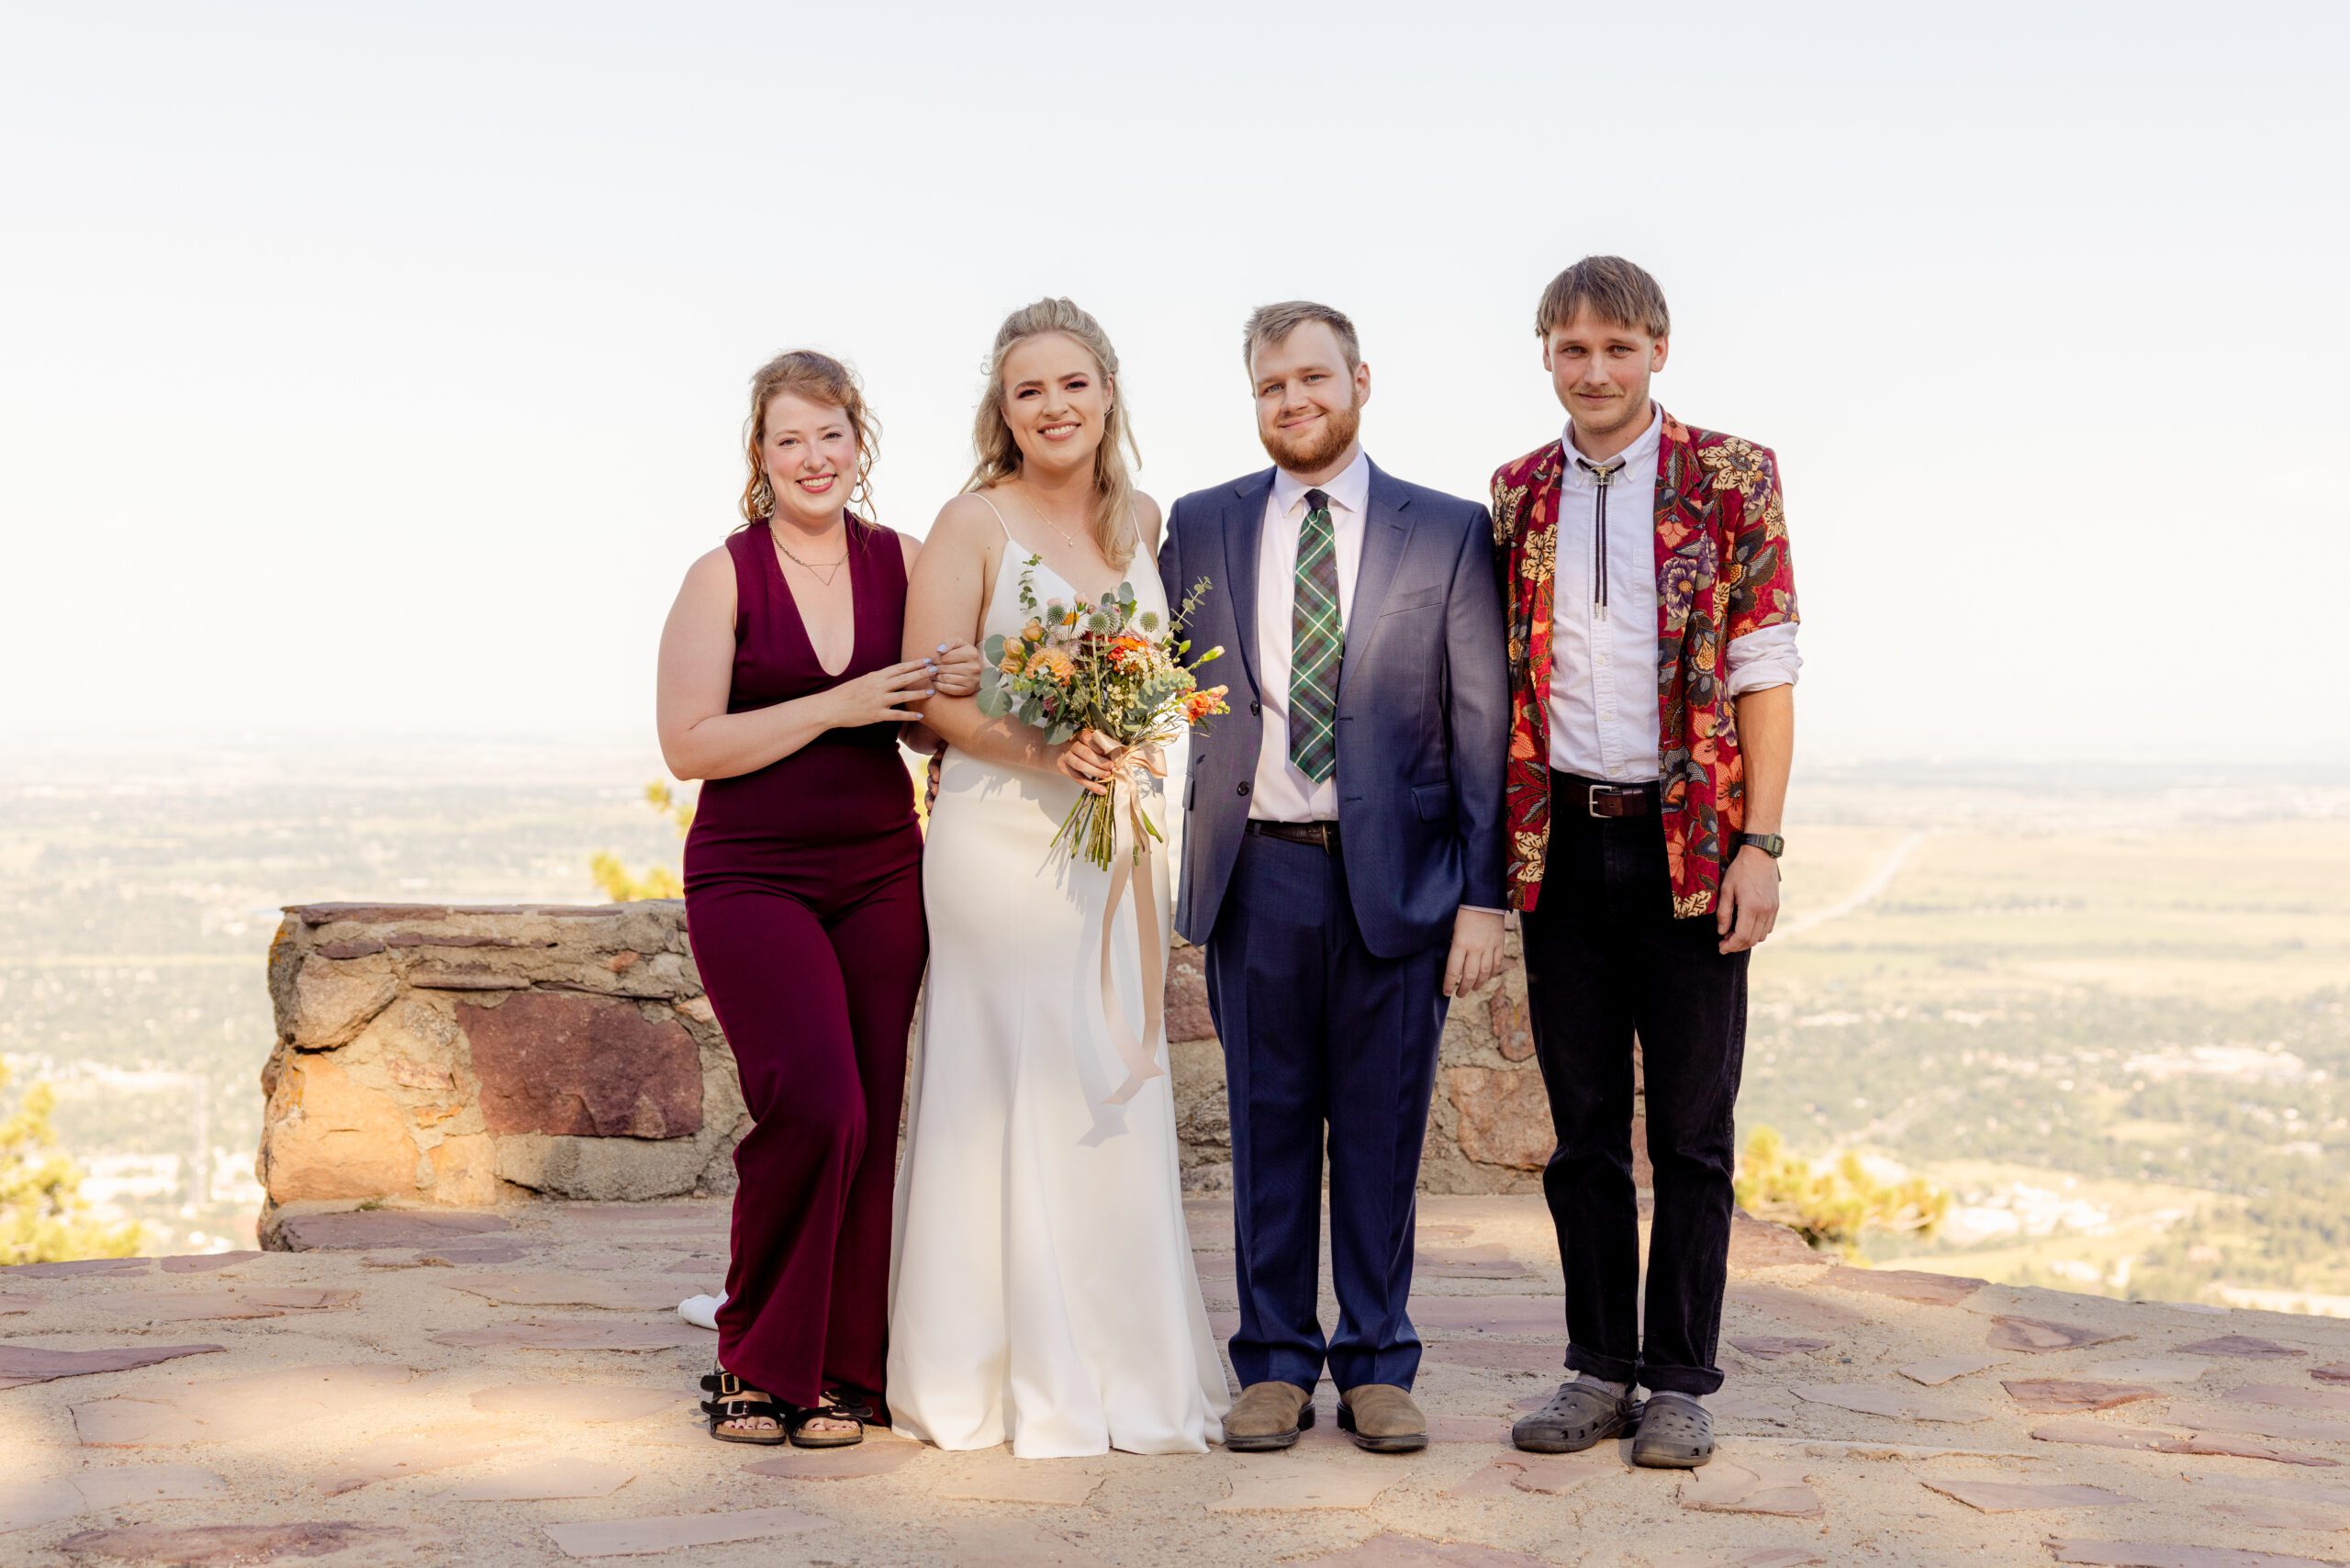 The bride and groom with their siblings after their Sunrise Amphitheater wedding.